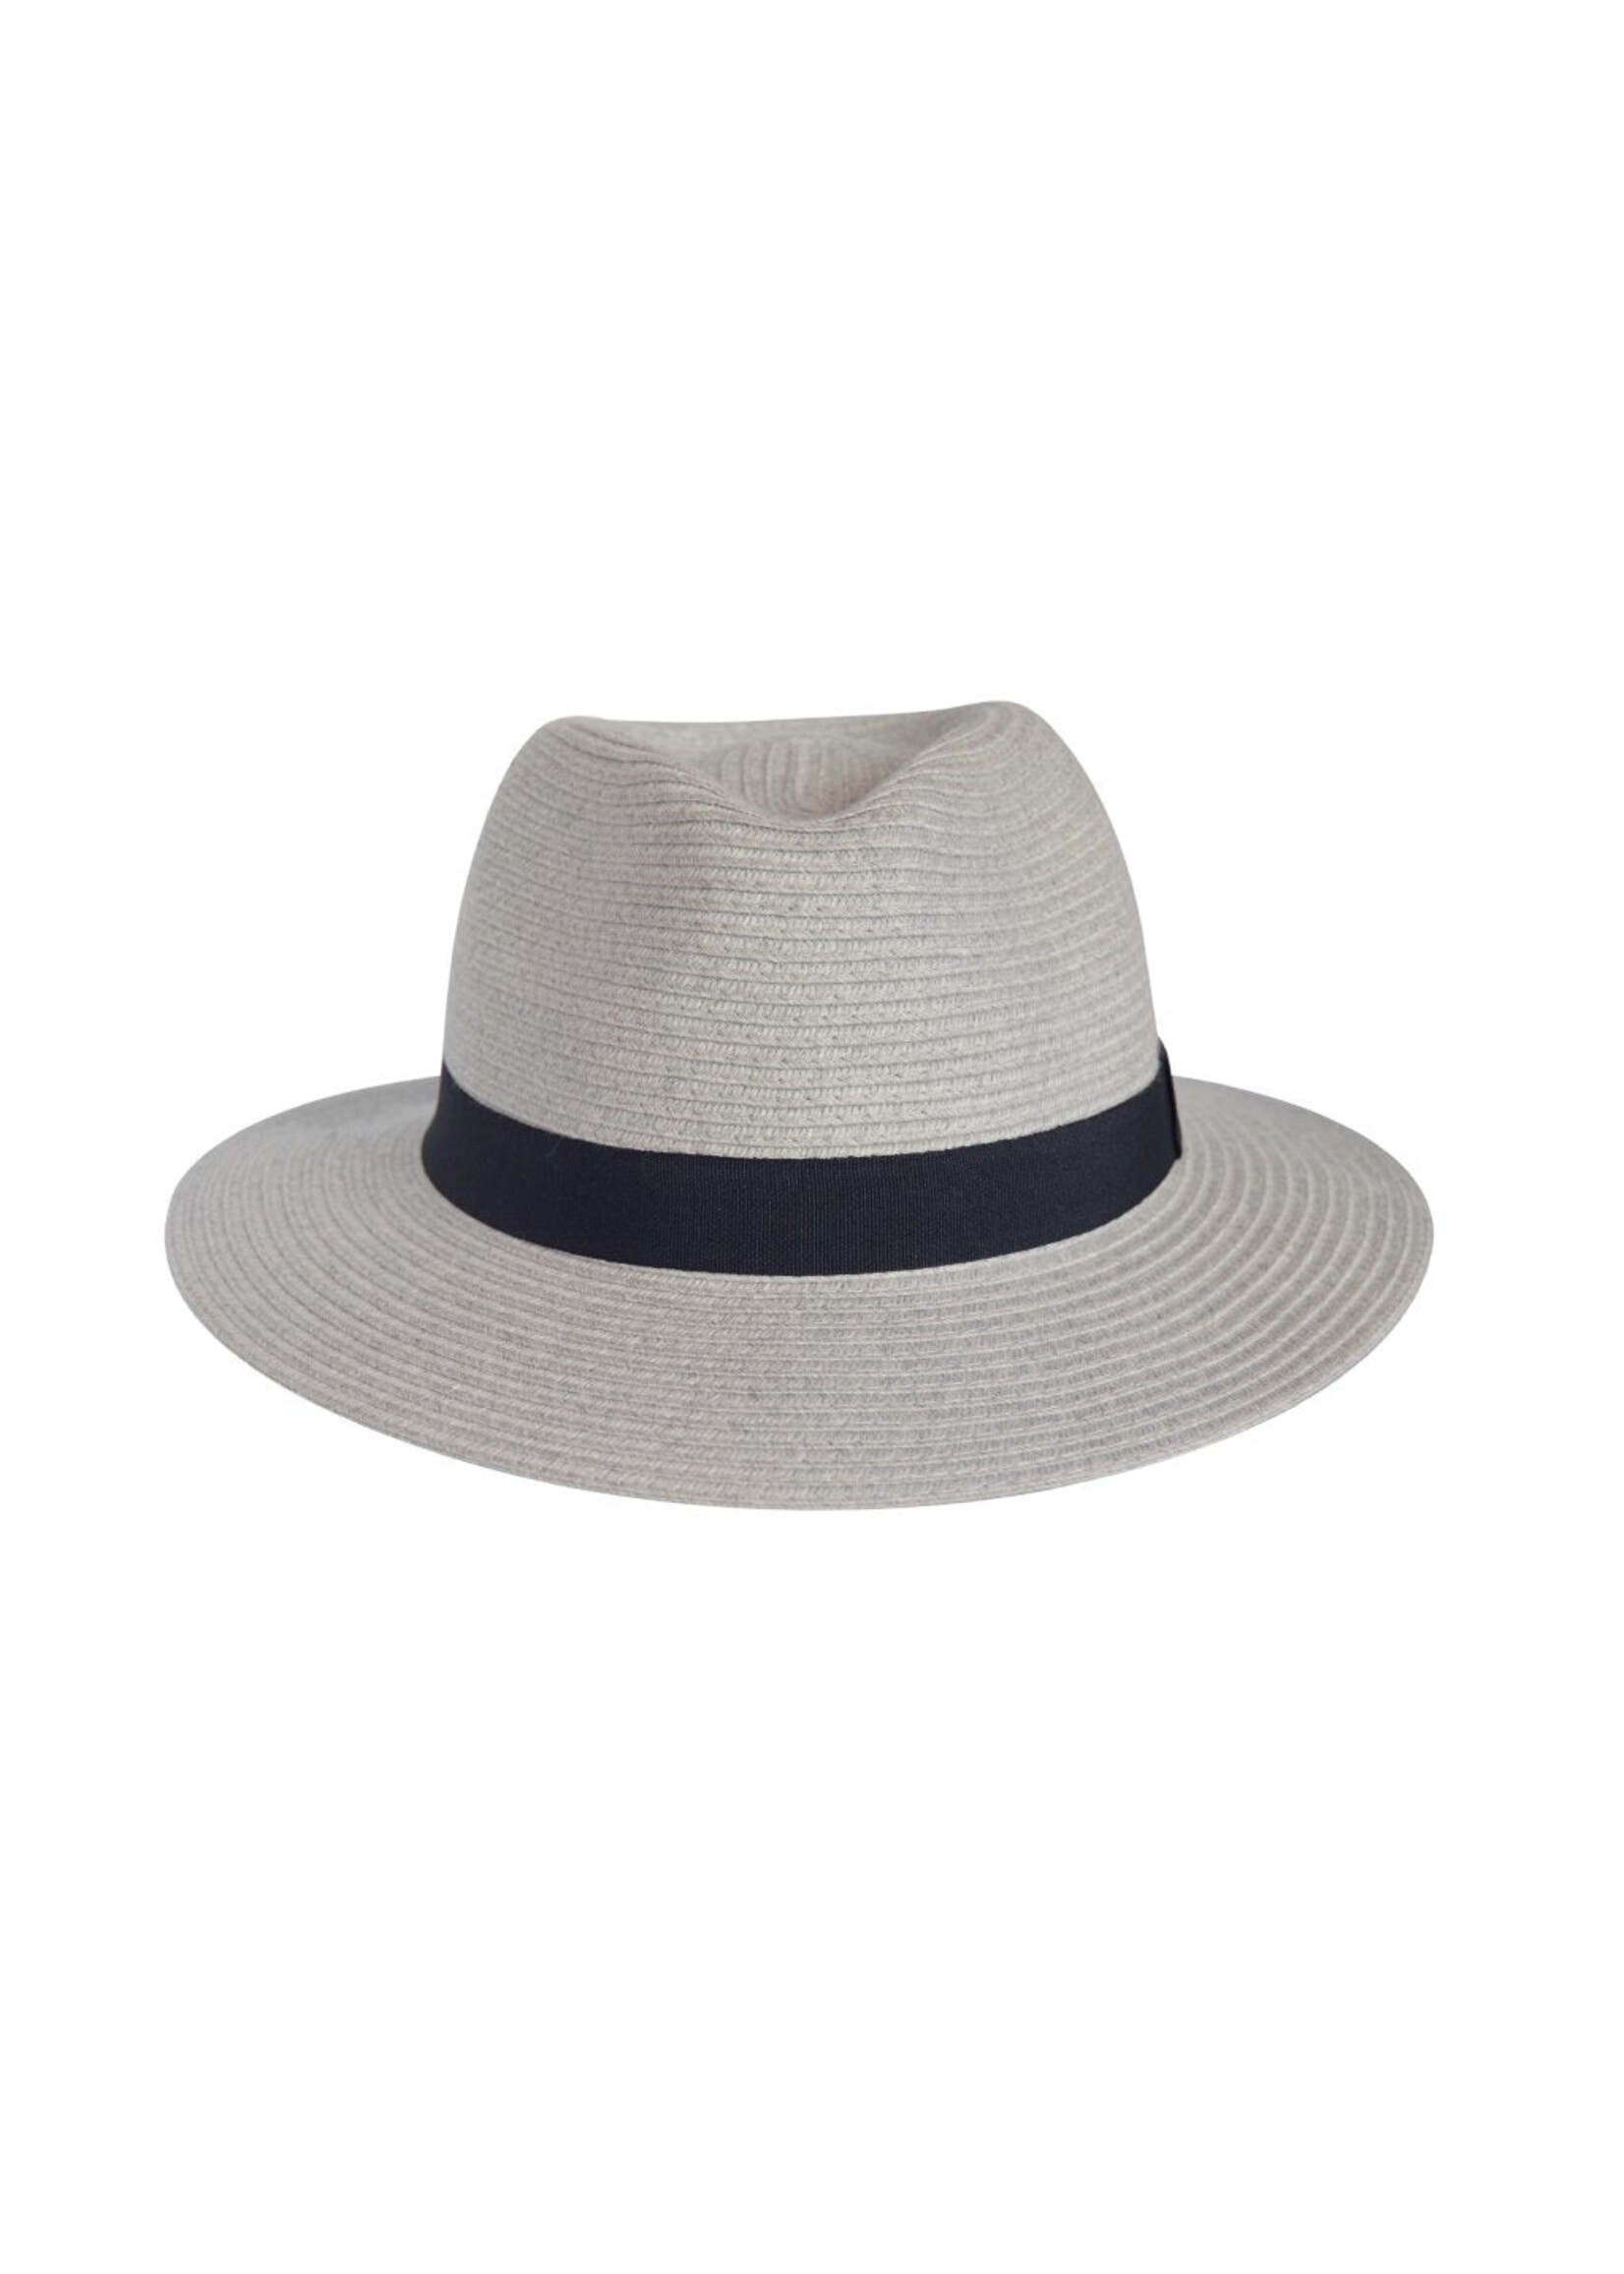 House of Ord - Cape Town Pana-mate Fedora Light Grey zonnehoed